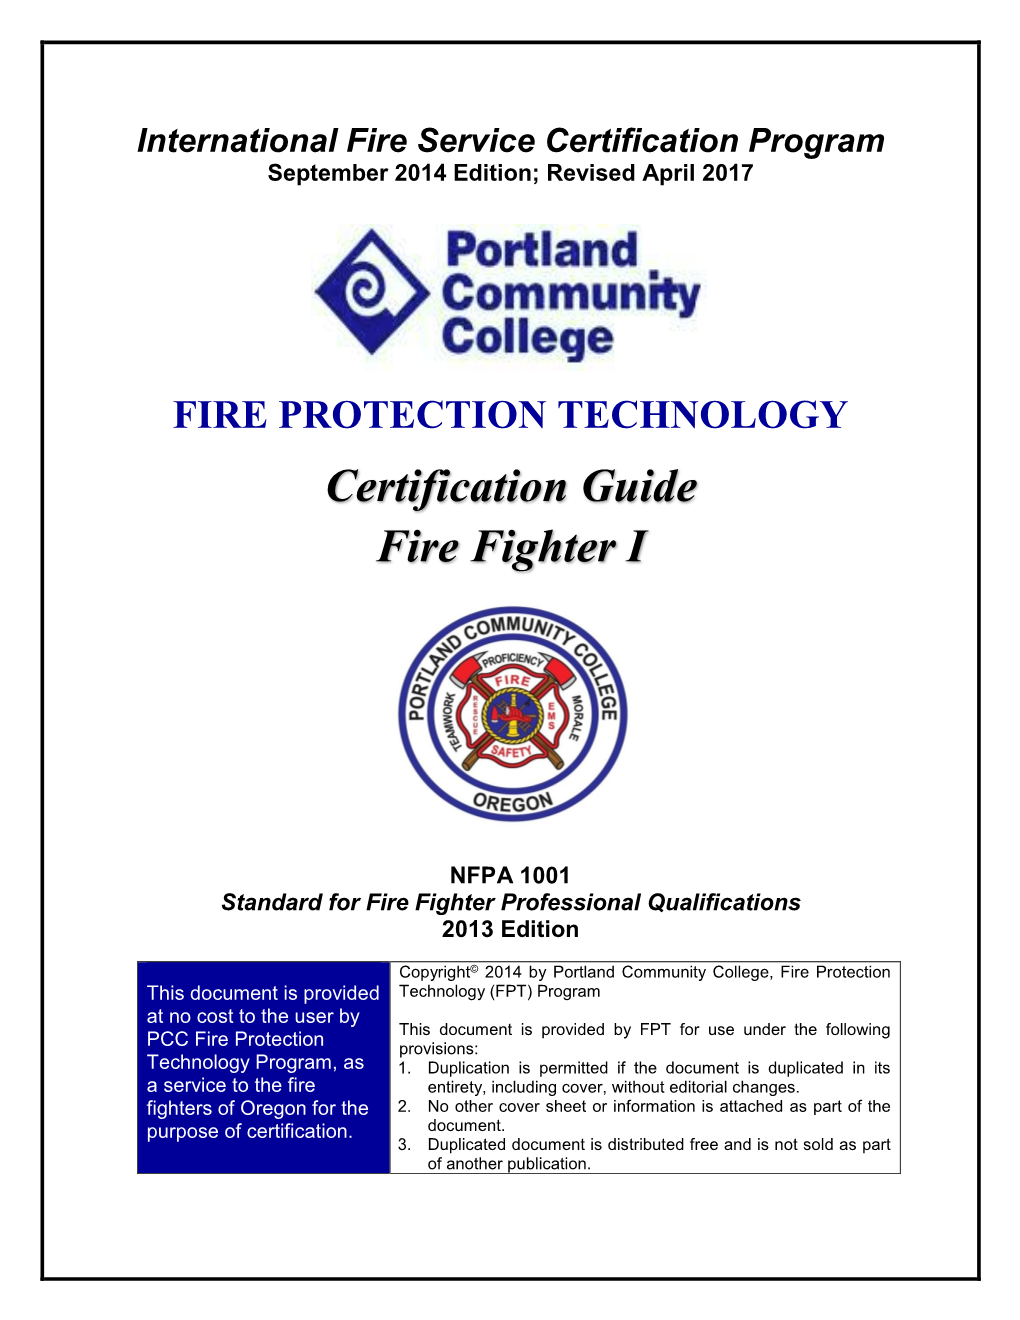 Certification Guide Fire Fighter I